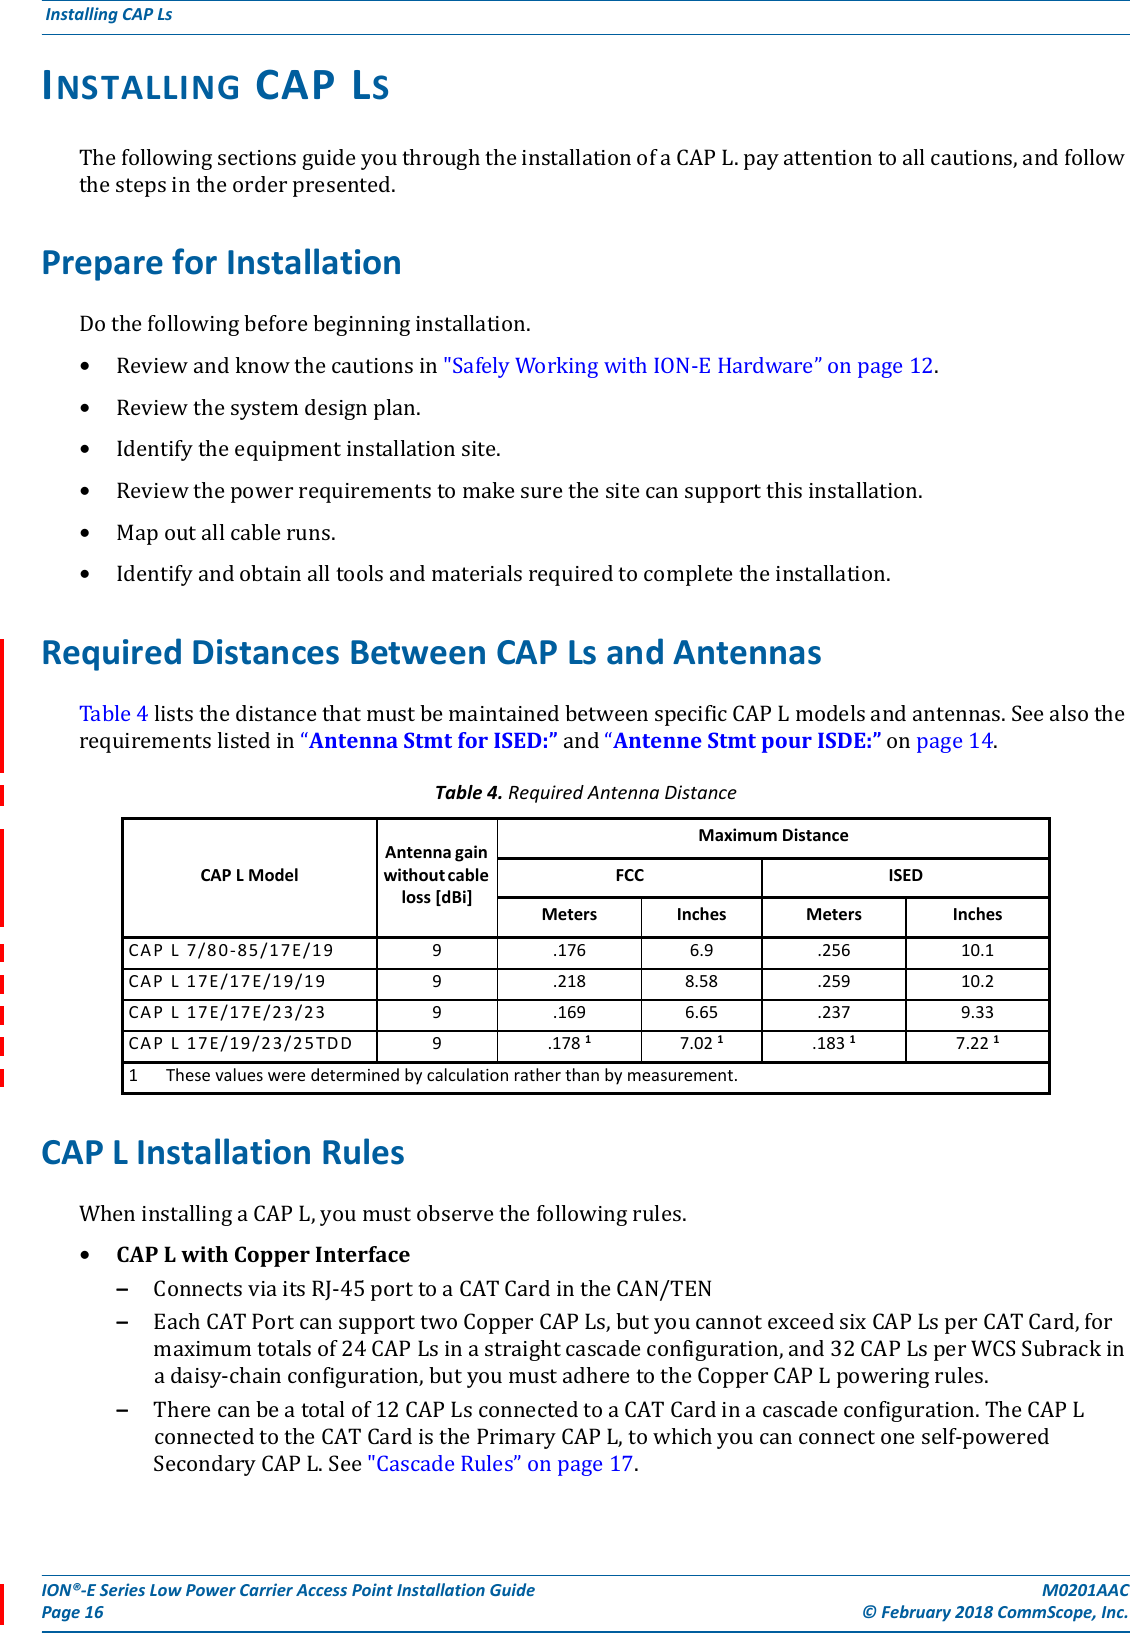 ION®-E Series Low Power Carrier Access Point Installation Guide M0201AACPage 16 © February 2018 CommScope, Inc. Installing CAP Ls  INSTALLING CAP LSThefollowingsectionsguideyouthroughtheinstallationofaCAPL.payattentiontoallcautions,andfollowthestepsintheorderpresented.Prepare for InstallationDothefollowingbeforebeginninginstallation.•Reviewandknowthecautionsin&quot;SafelyWorkingwithION-EHardware”onpage12.•Reviewthesystemdesignplan.•Identifytheequipmentinstallationsite.•Reviewthepowerrequirementstomakesurethesitecansupportthisinstallation.•Mapoutallcableruns.•Identifyandobtainalltoolsandmaterialsrequiredtocompletetheinstallation.Required Distances Between CAP Ls and AntennasTable4liststhedistancethatmustbemaintainedbetweenspecificCAPLmodelsandantennas.Seealsotherequirementslistedin“AntennaStmtforISED:”and“AntenneStmtpourISDE:”onpage14.CAP L Installation RulesWheninstallingaCAPL,youmustobservethefollowingrules.•CAPLwithCopperInterface–ConnectsviaitsRJ-45porttoaCATCardintheCAN/TEN–EachCATPortcansupporttwoCopperCAPLs,butyoucannotexceedsixCAPLsperCATCard,formaximumtotalsof24CAPLsinastraightcascadeconfiguration,and32CAPLsperWCSSubrackinadaisy-chainconfiguration,butyoumustadheretotheCopperCAPLpoweringrules.–Therecanbeatotalof12CAPLsconnectedtoaCATCardinacascadeconfiguration.TheCAPLconnectedtotheCATCardisthePrimaryCAPL,towhichyoucanconnectoneself-poweredSecondaryCAPL.See&quot;CascadeRules”onpage17.Table 4. Required Antenna DistanceCAP L ModelAntenna gain without cable loss [dBi]Maximum DistanceFCC ISEDMeters Inches Meters InchesCAP L  7 /80-85/17 E / 19 9 .176 6.9 .256 10.1CAP L 17E/17E/19/19 9 .218 8.58 .259 10.2CAP L   1 7E/17E/2 3 / 2 3 9 .169 6.65 .237 9.33CAP L   1 7E/19/2 3 / 2 5TDD 9 .178 1 7.02 1  .183 1  7.22 1 1 These values were determined by calculation rather than by measurement.